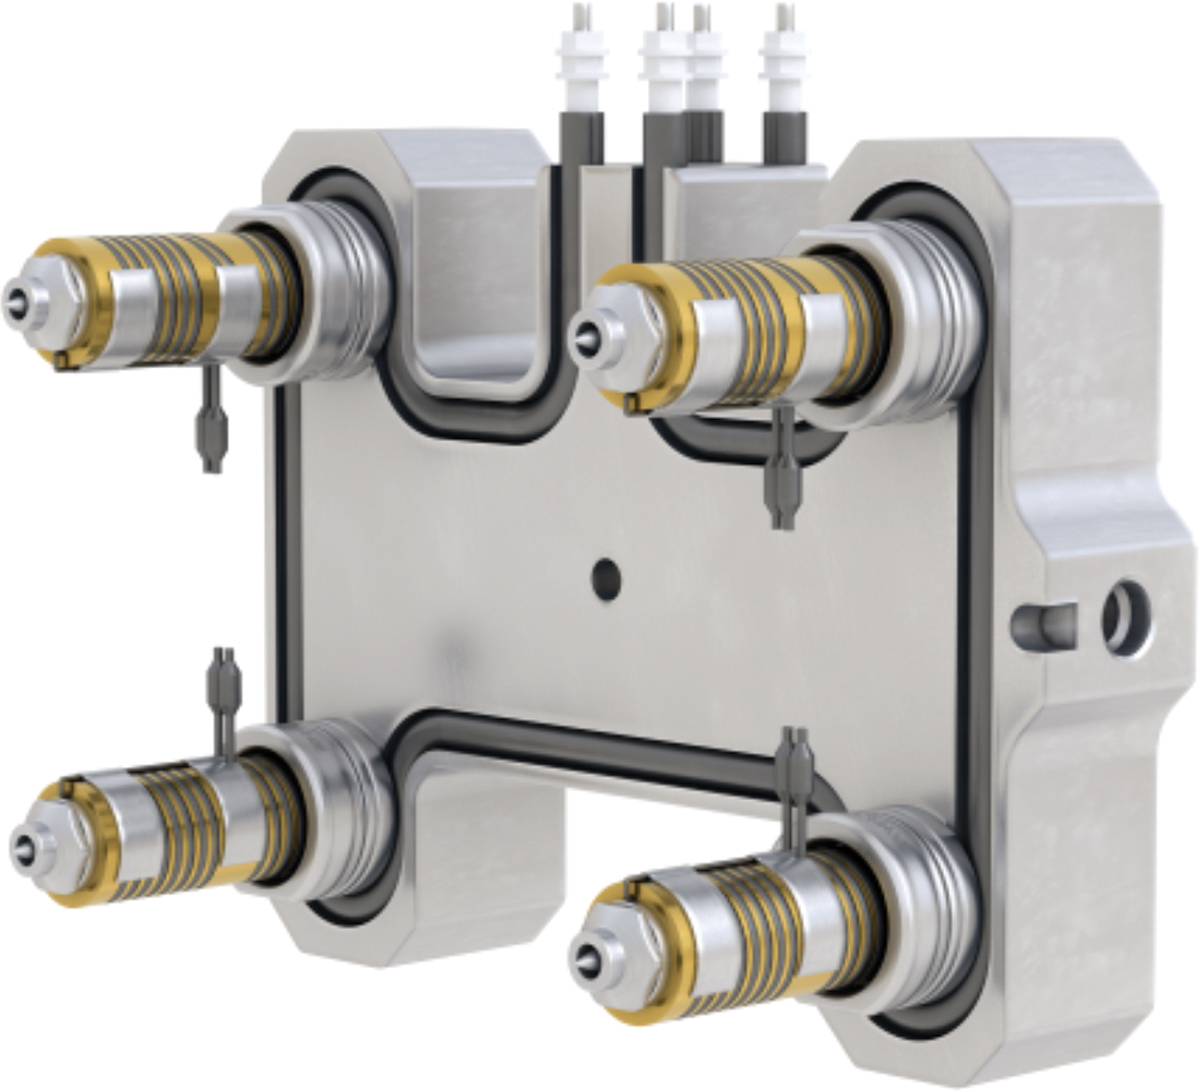 EcoONE Series hot runners facilitate resin transfer into molds, versatile for small commodities production, offering five standard non-valved and five standard valved gating options.